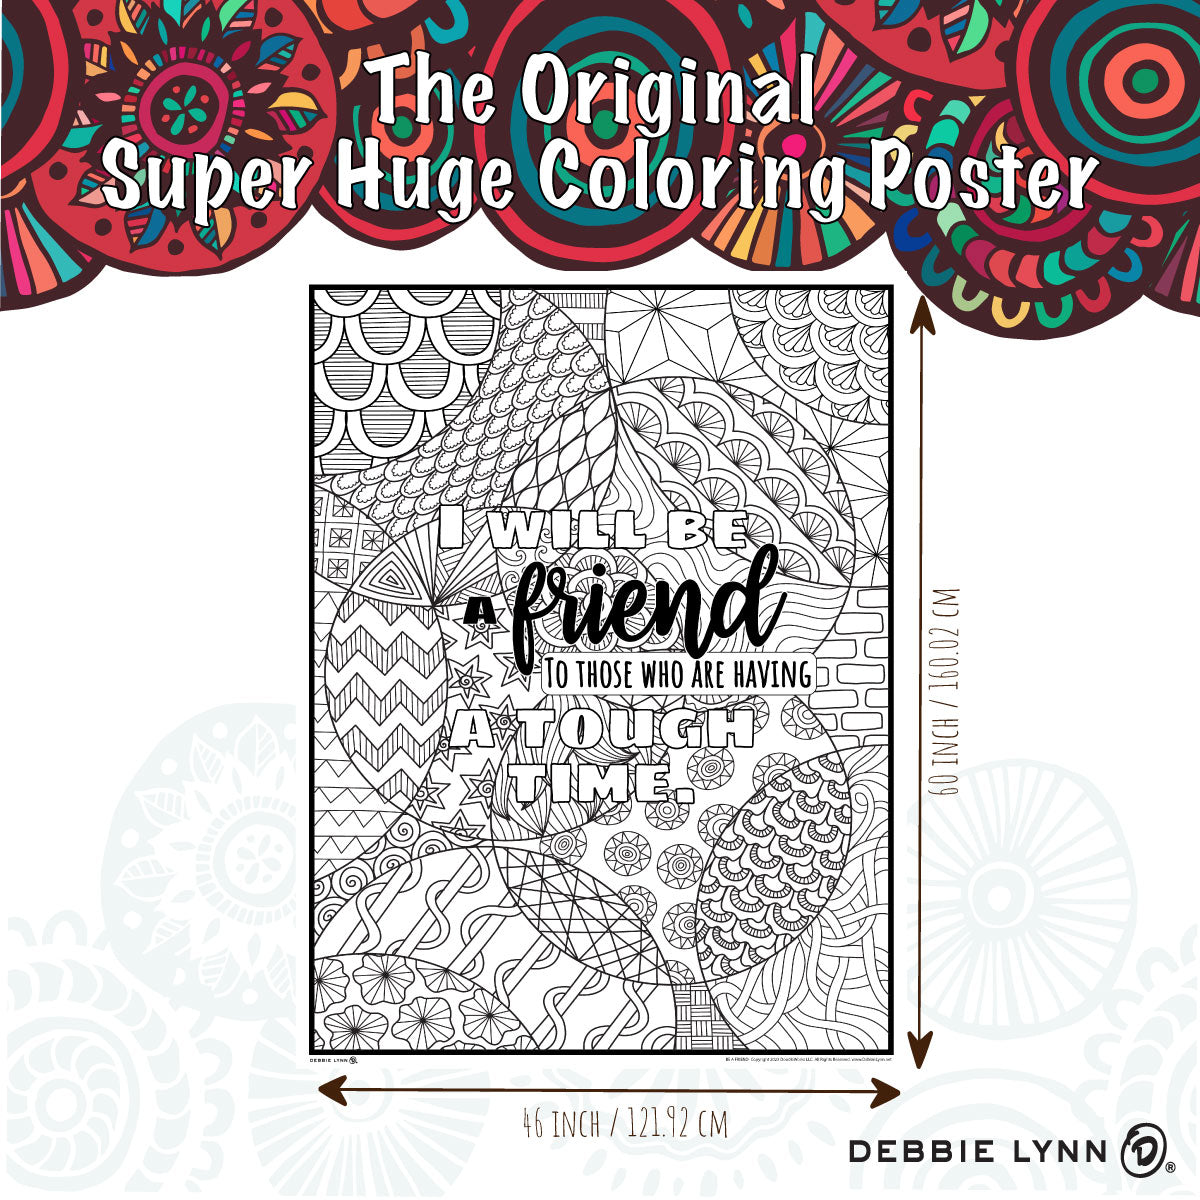 Be A Friend Personalized Giant Coloring Poster 46"x60"